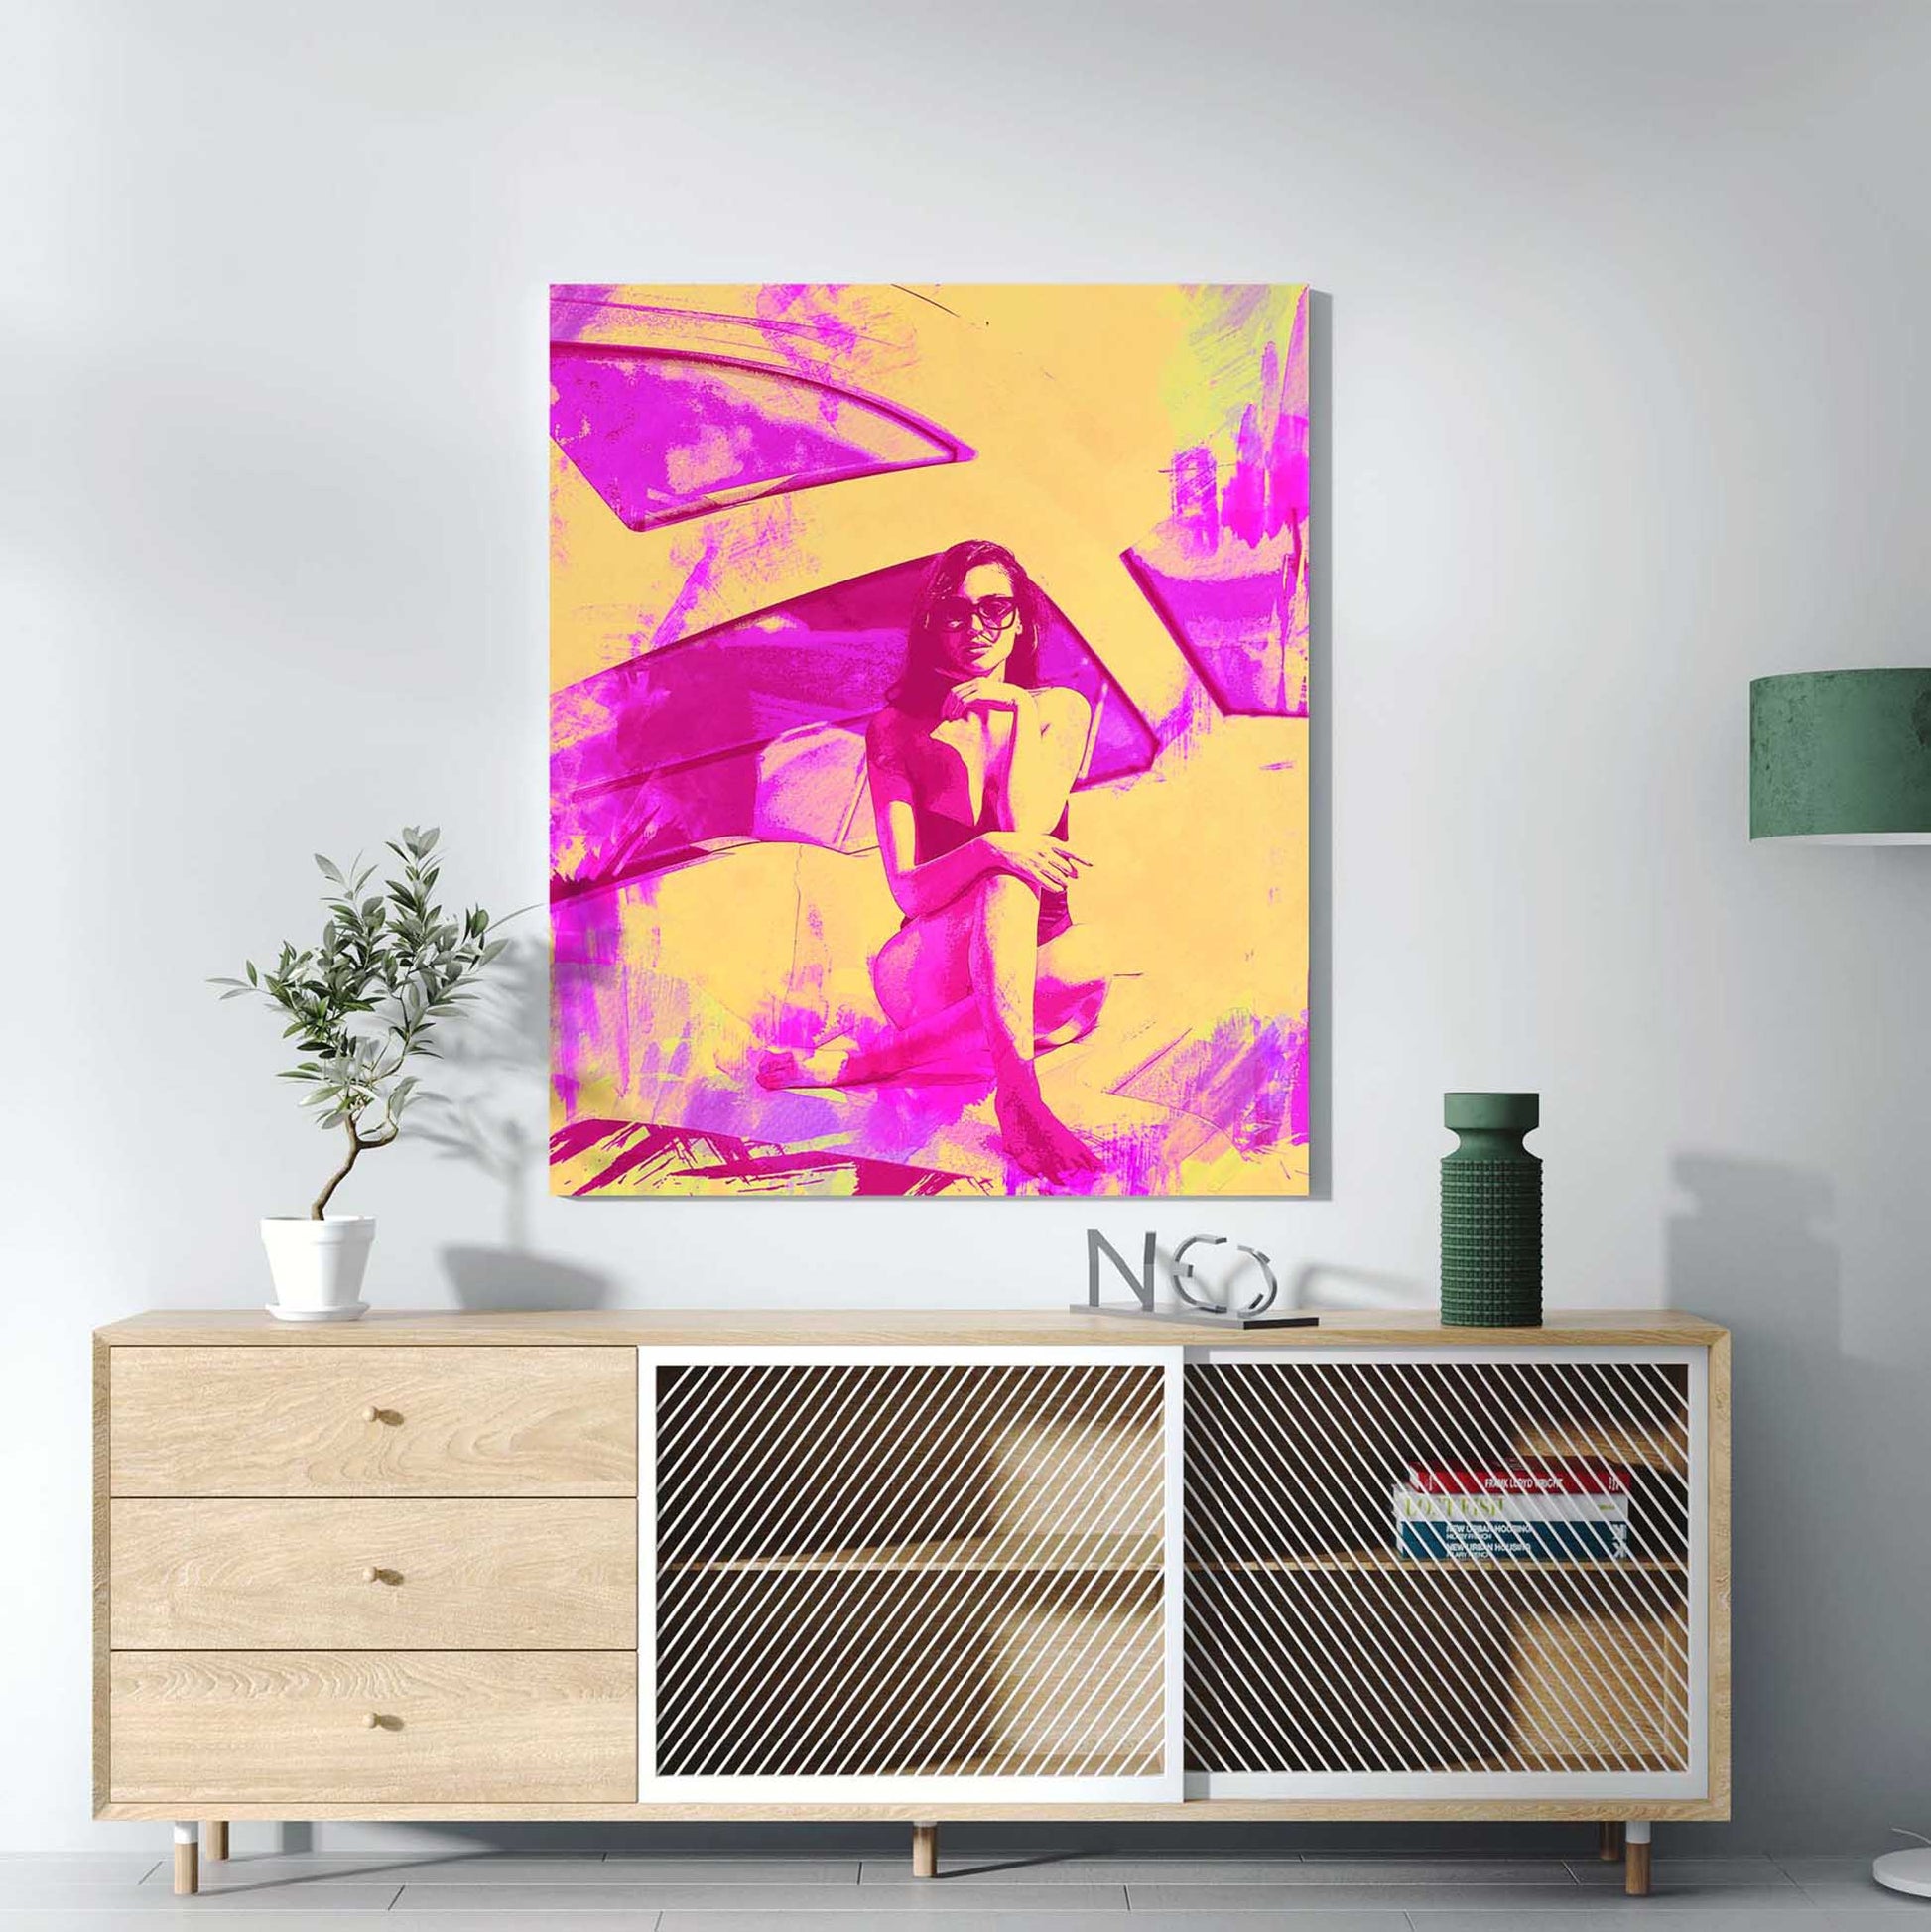 Discover the magic of personalized art with our Personalised Pink & Yellow Painting Canvas. Crafted with utmost care and precision, this watercolor painting from photo embodies the essence of your cherished memories